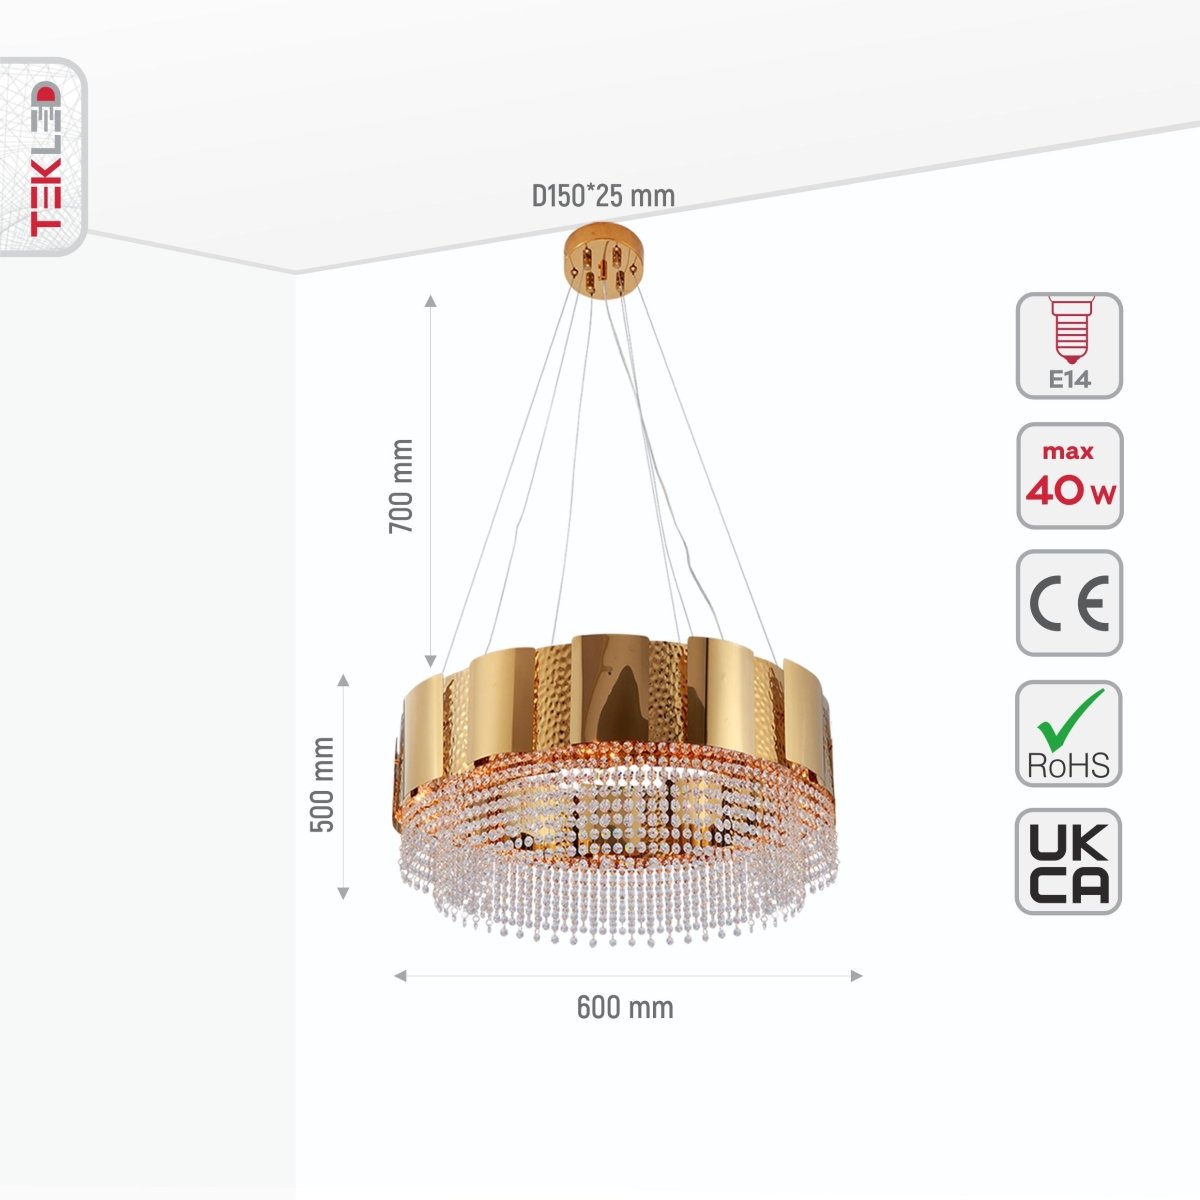 Size and specs of Octagon Crystal Gold Metal Chandelier D600 with 8xE14 Fitting | TEKLED 156-19576